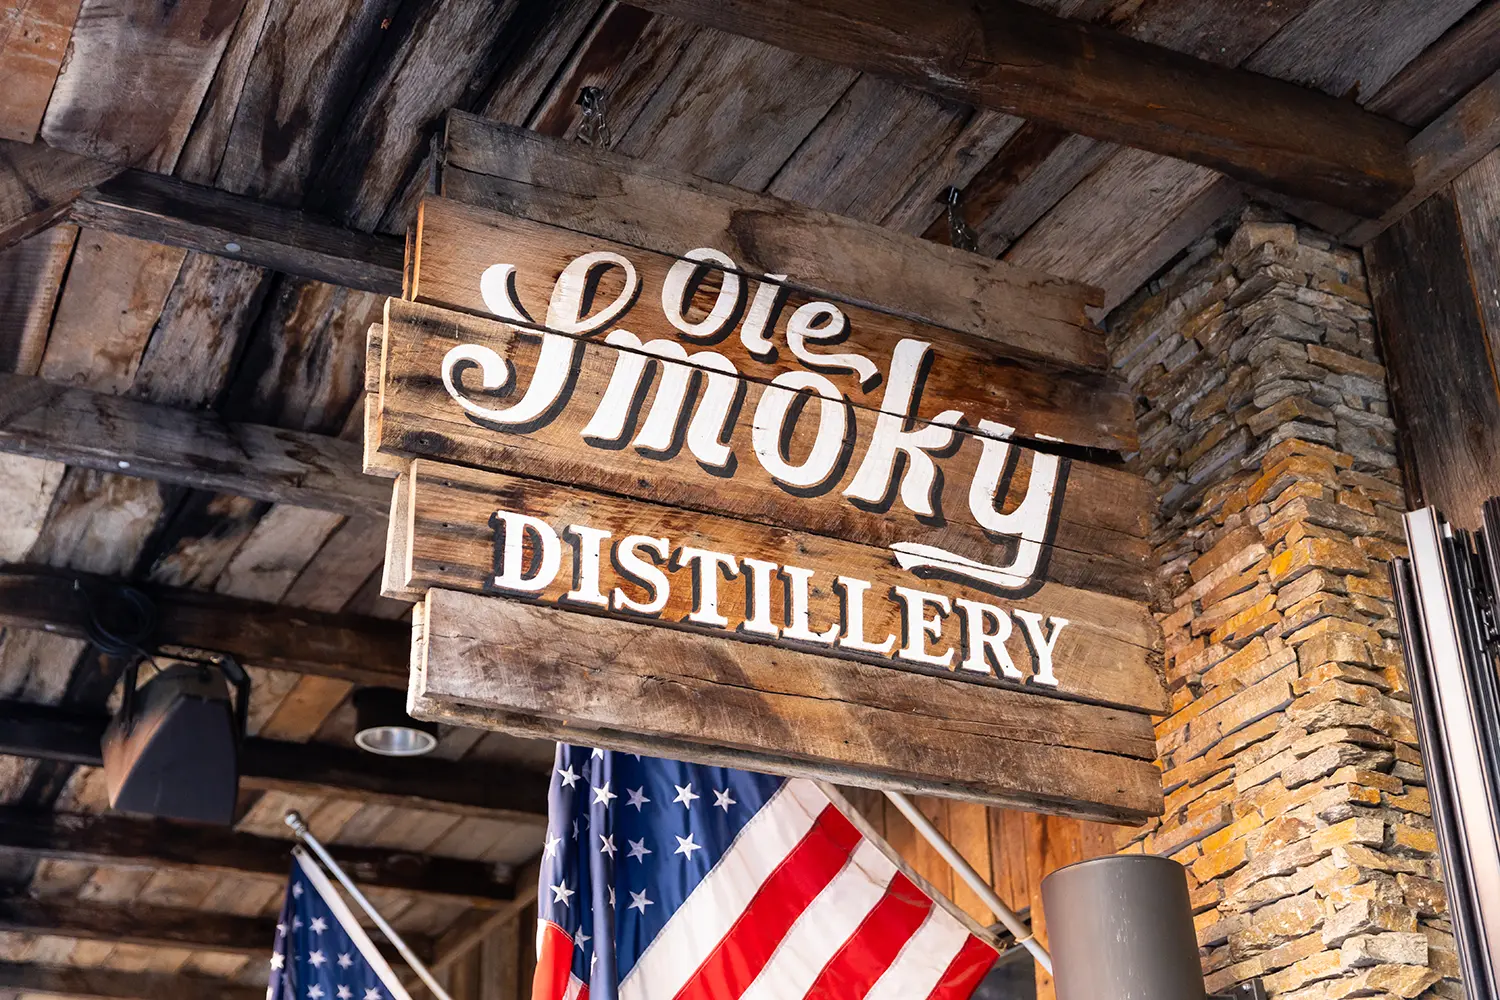 The Ole Smoky Distillery is located in downtown Gatlinburg, TN